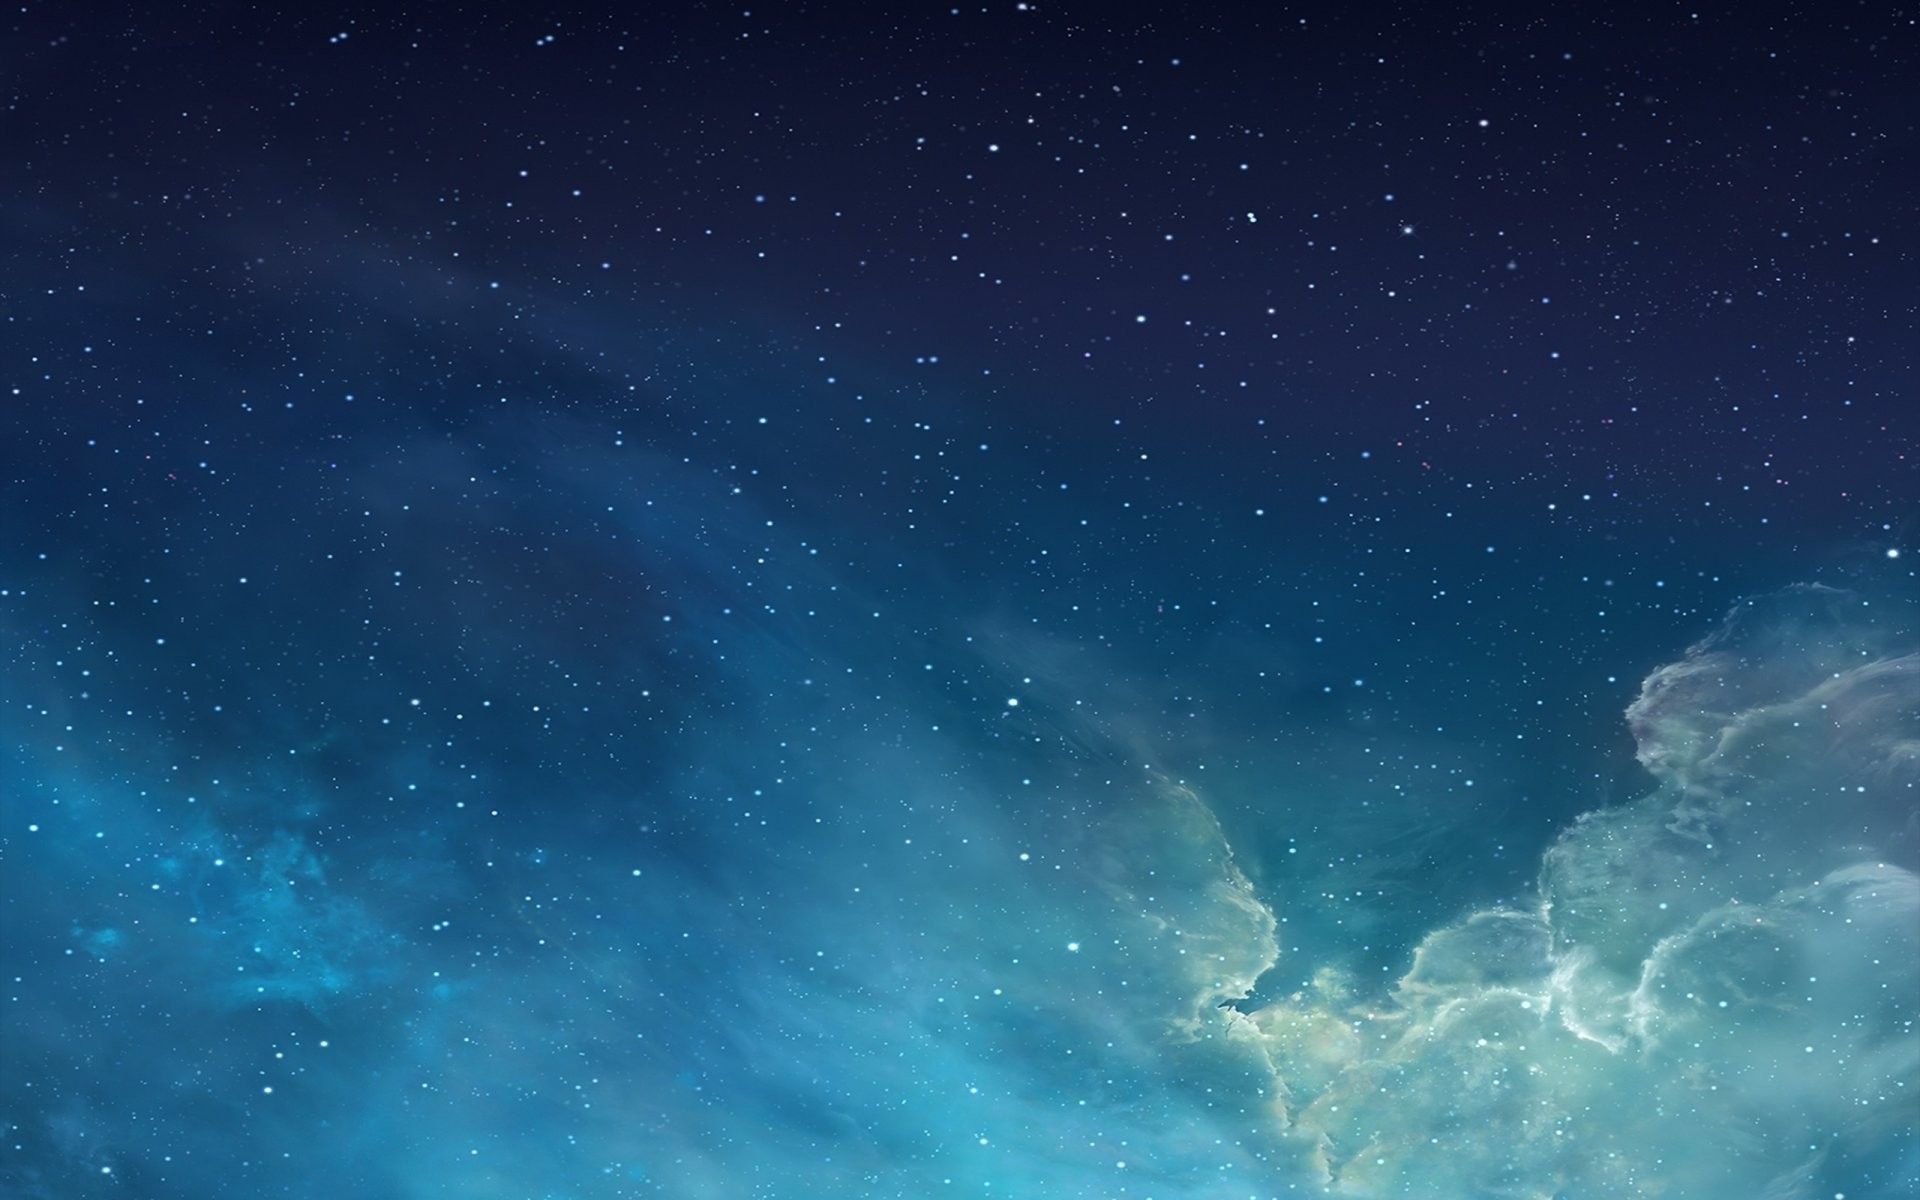 A blue and white background with stars - IMac